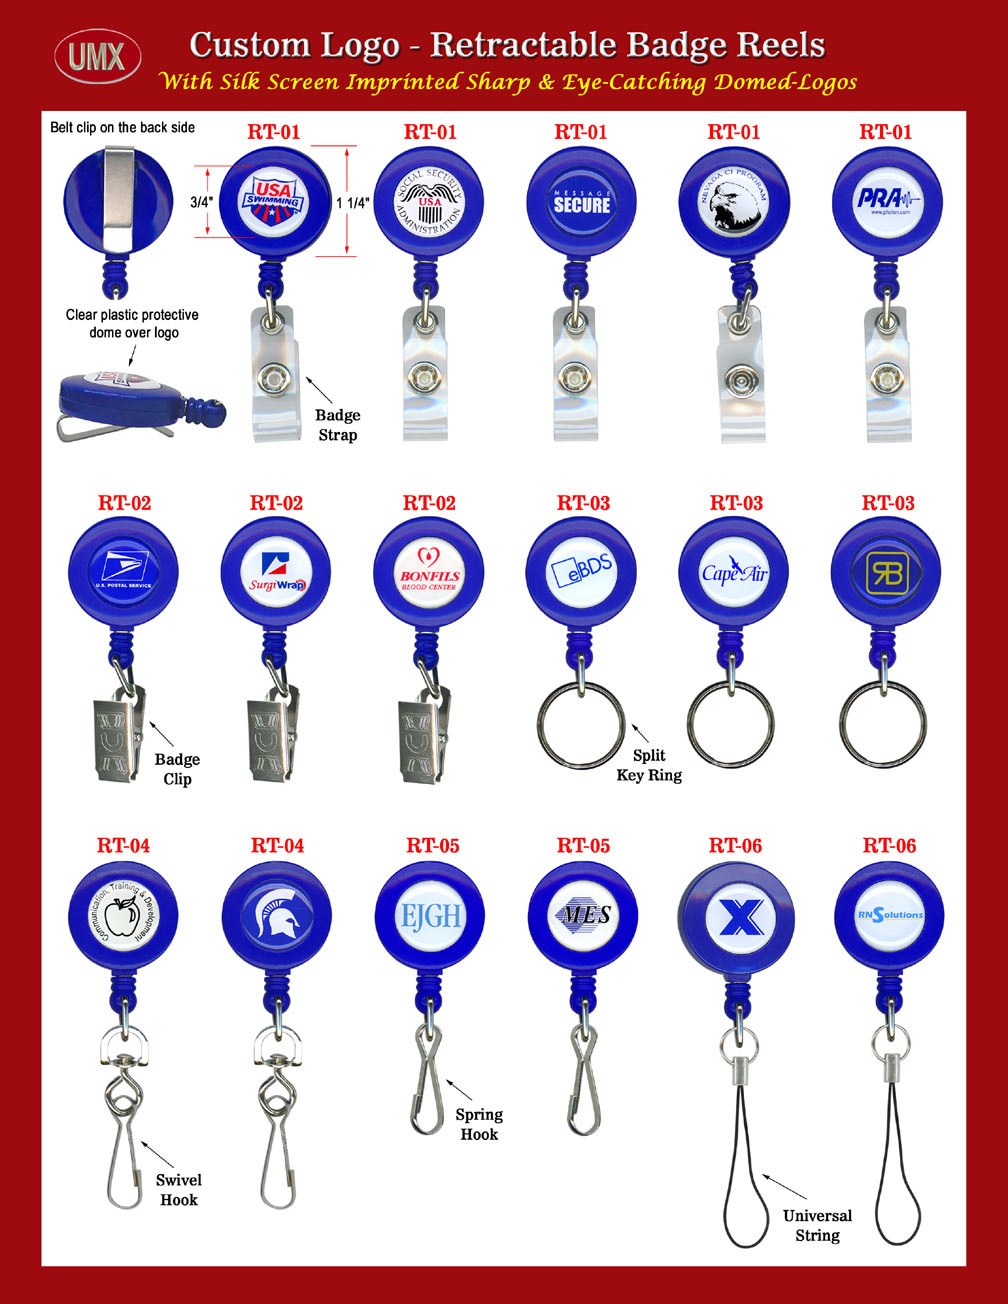 Custom Printed Badge Reels With Full CMYK and Pantone PMS Color Graphics Or Text Messages